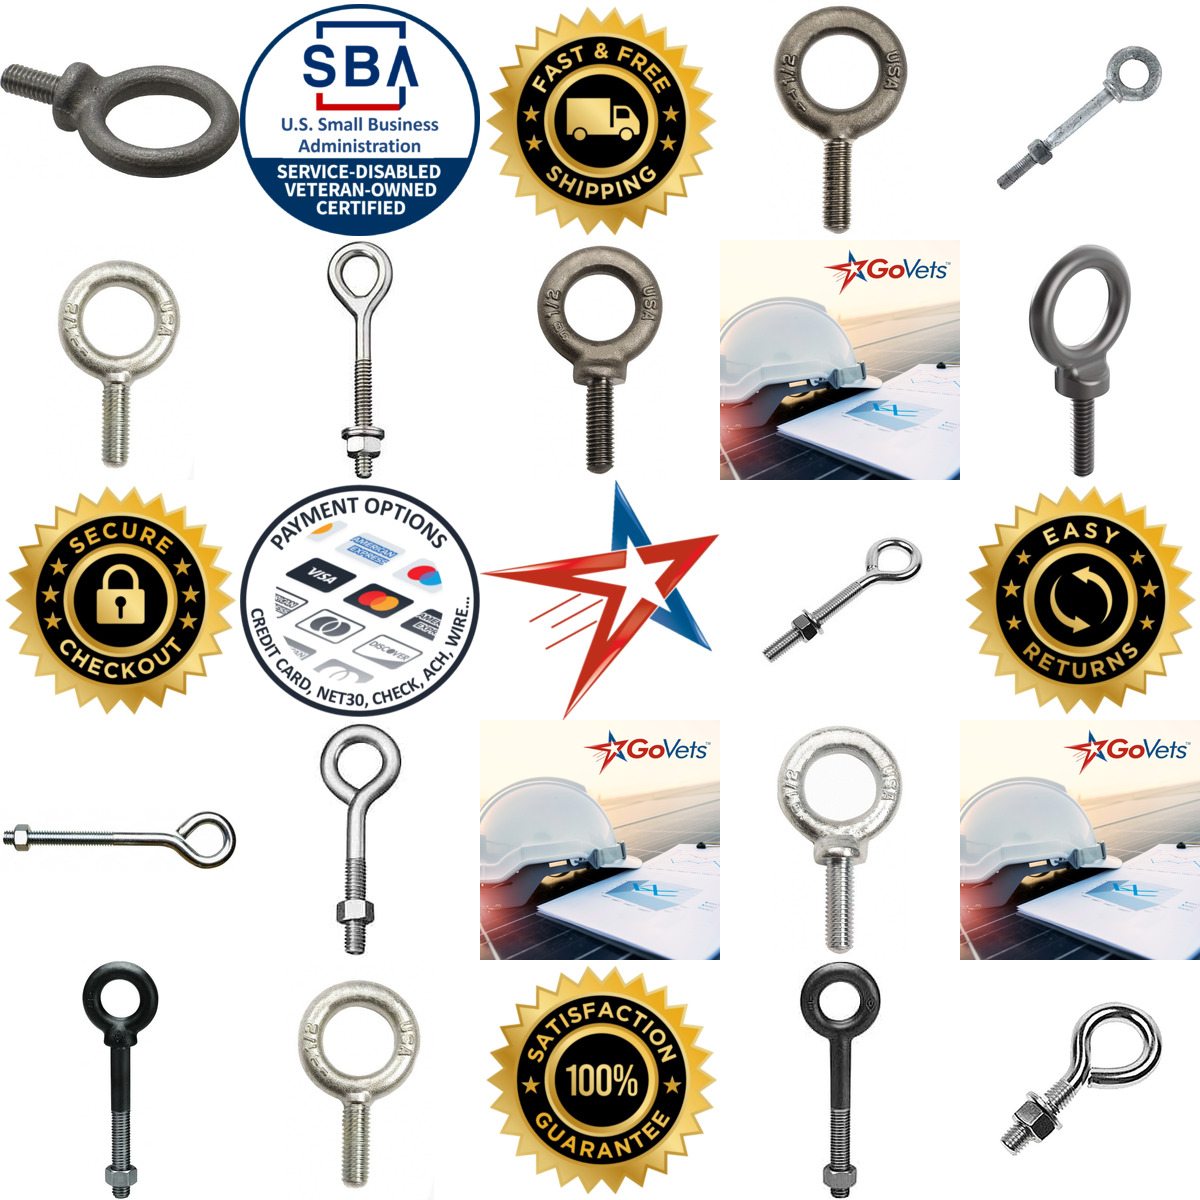 A selection of Eye Bolts products on GoVets